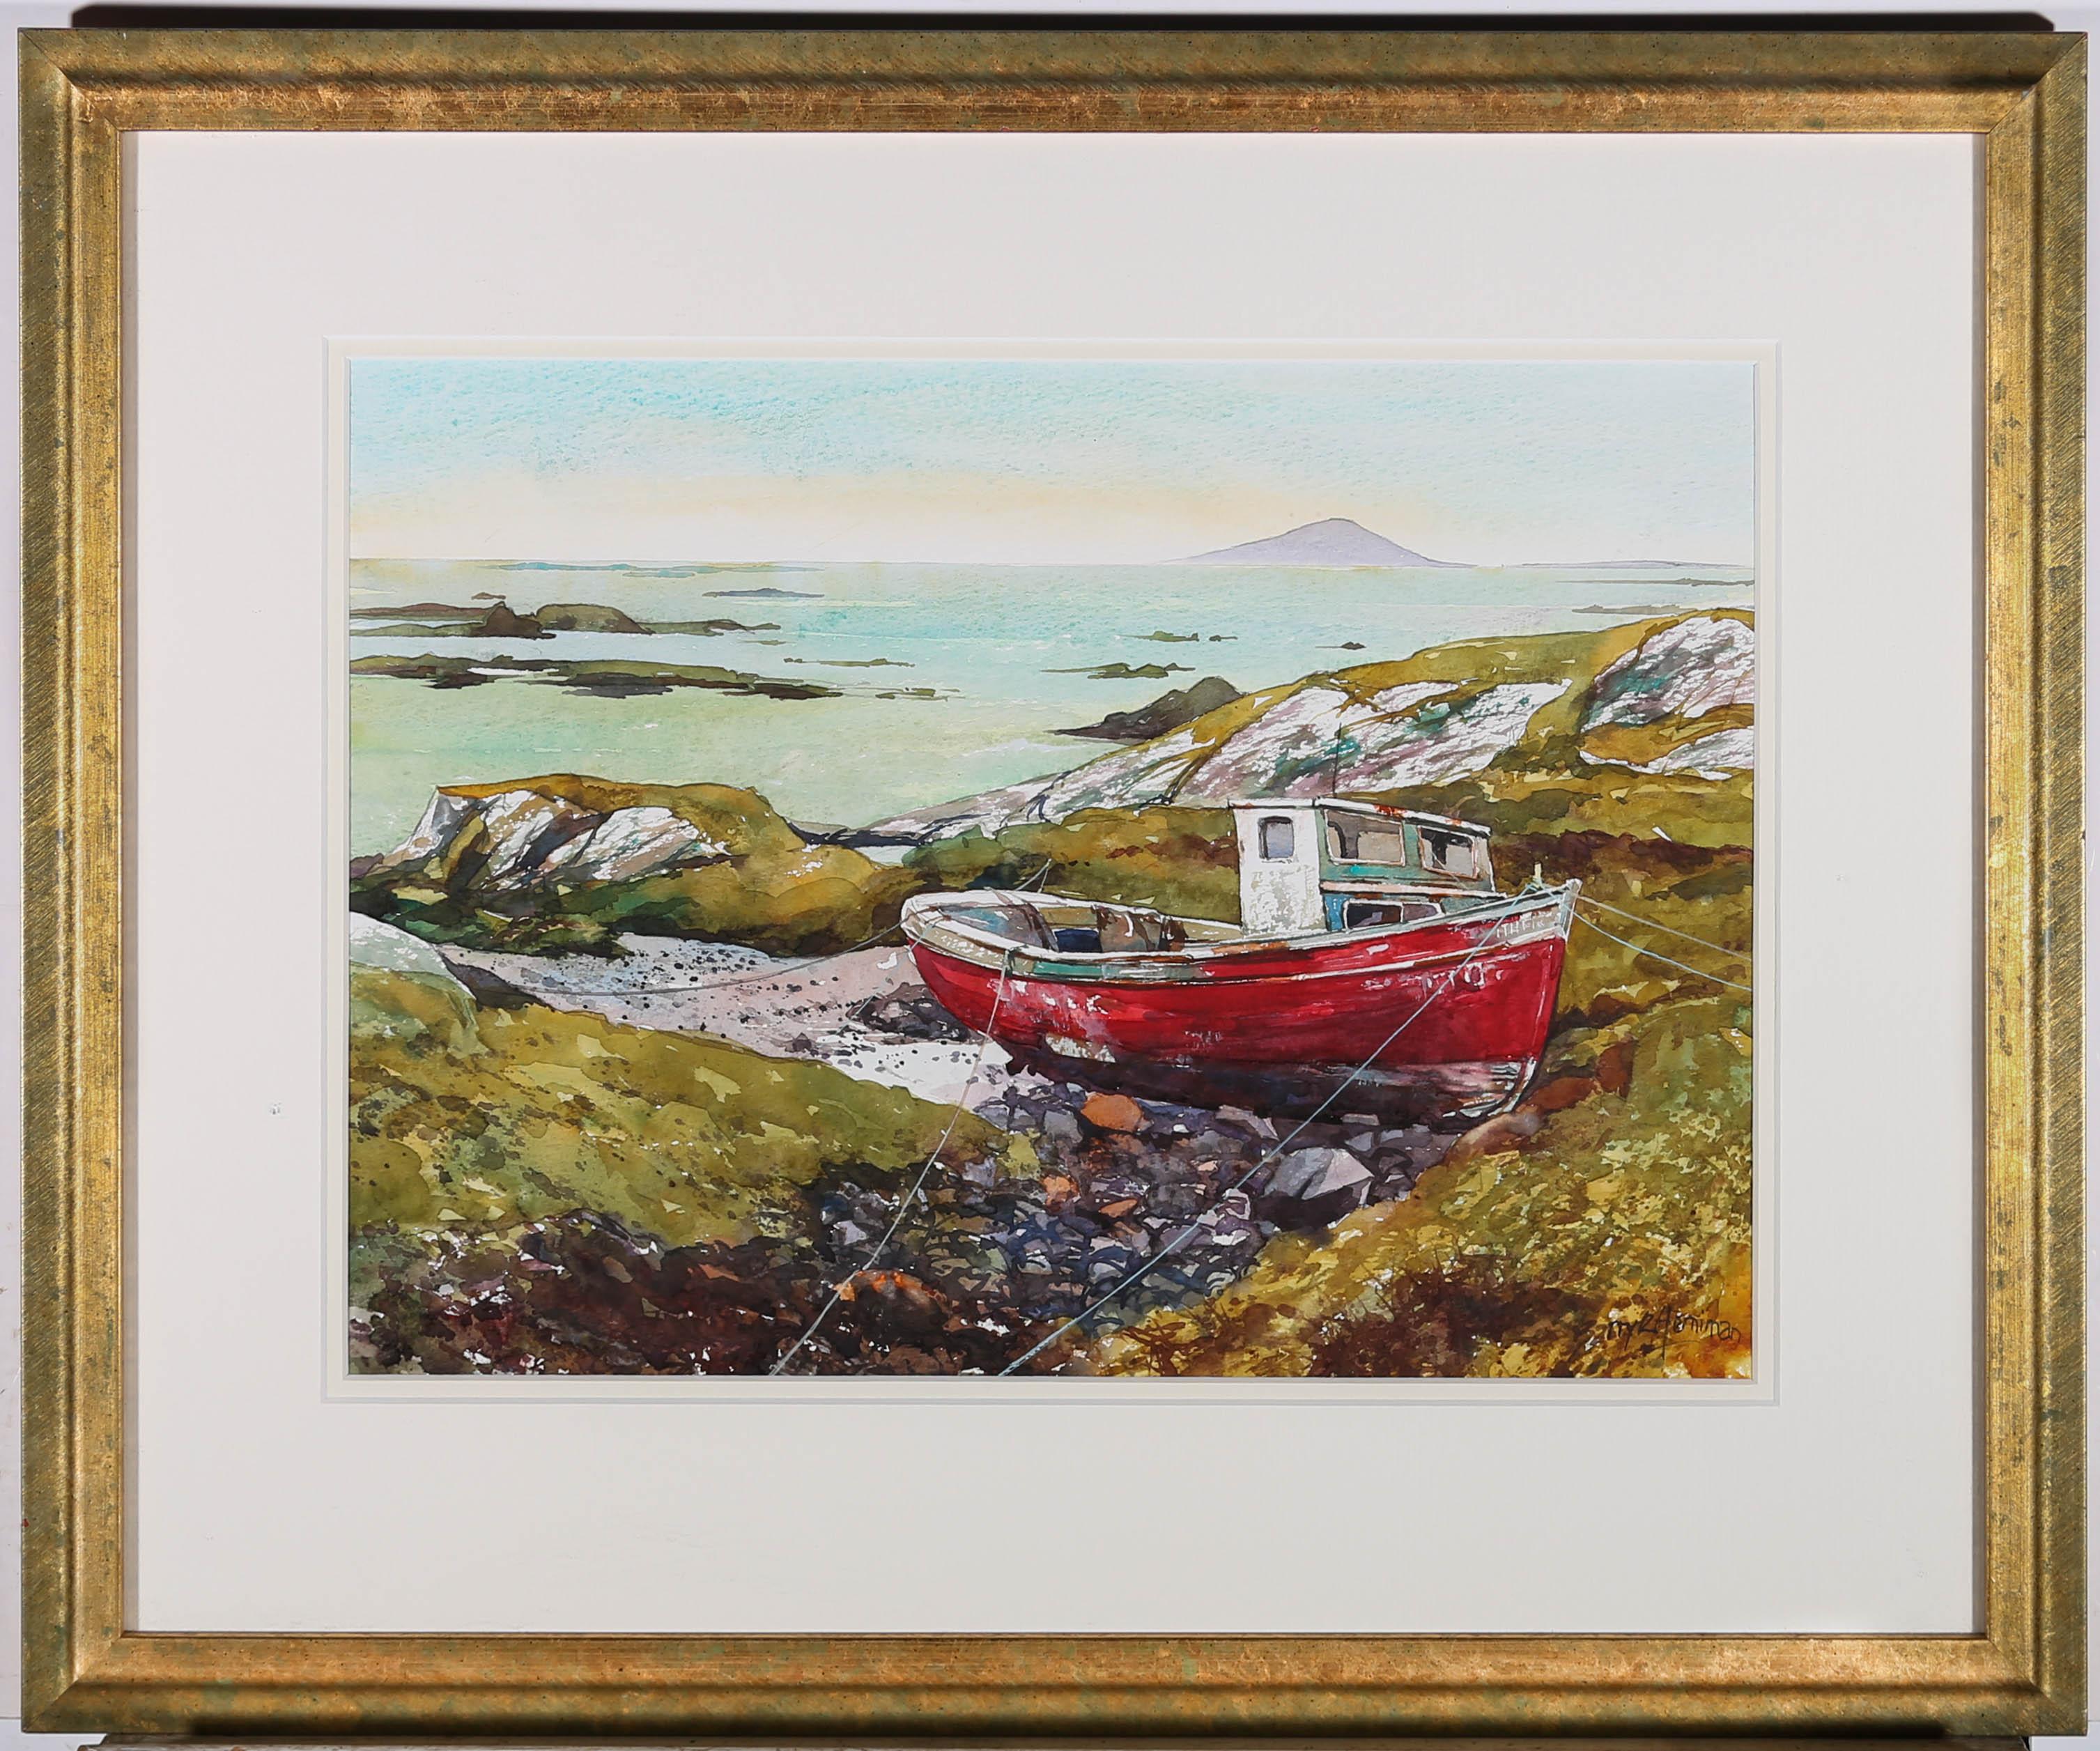 A well presented and colourful watercolour study by Barry Herniman of Connemara coastline, Ireland. A lonely beached fishing boat has been captured nestled on the shore. Signed to the lower right-hand corner. Presented in a contemporary gilt effect